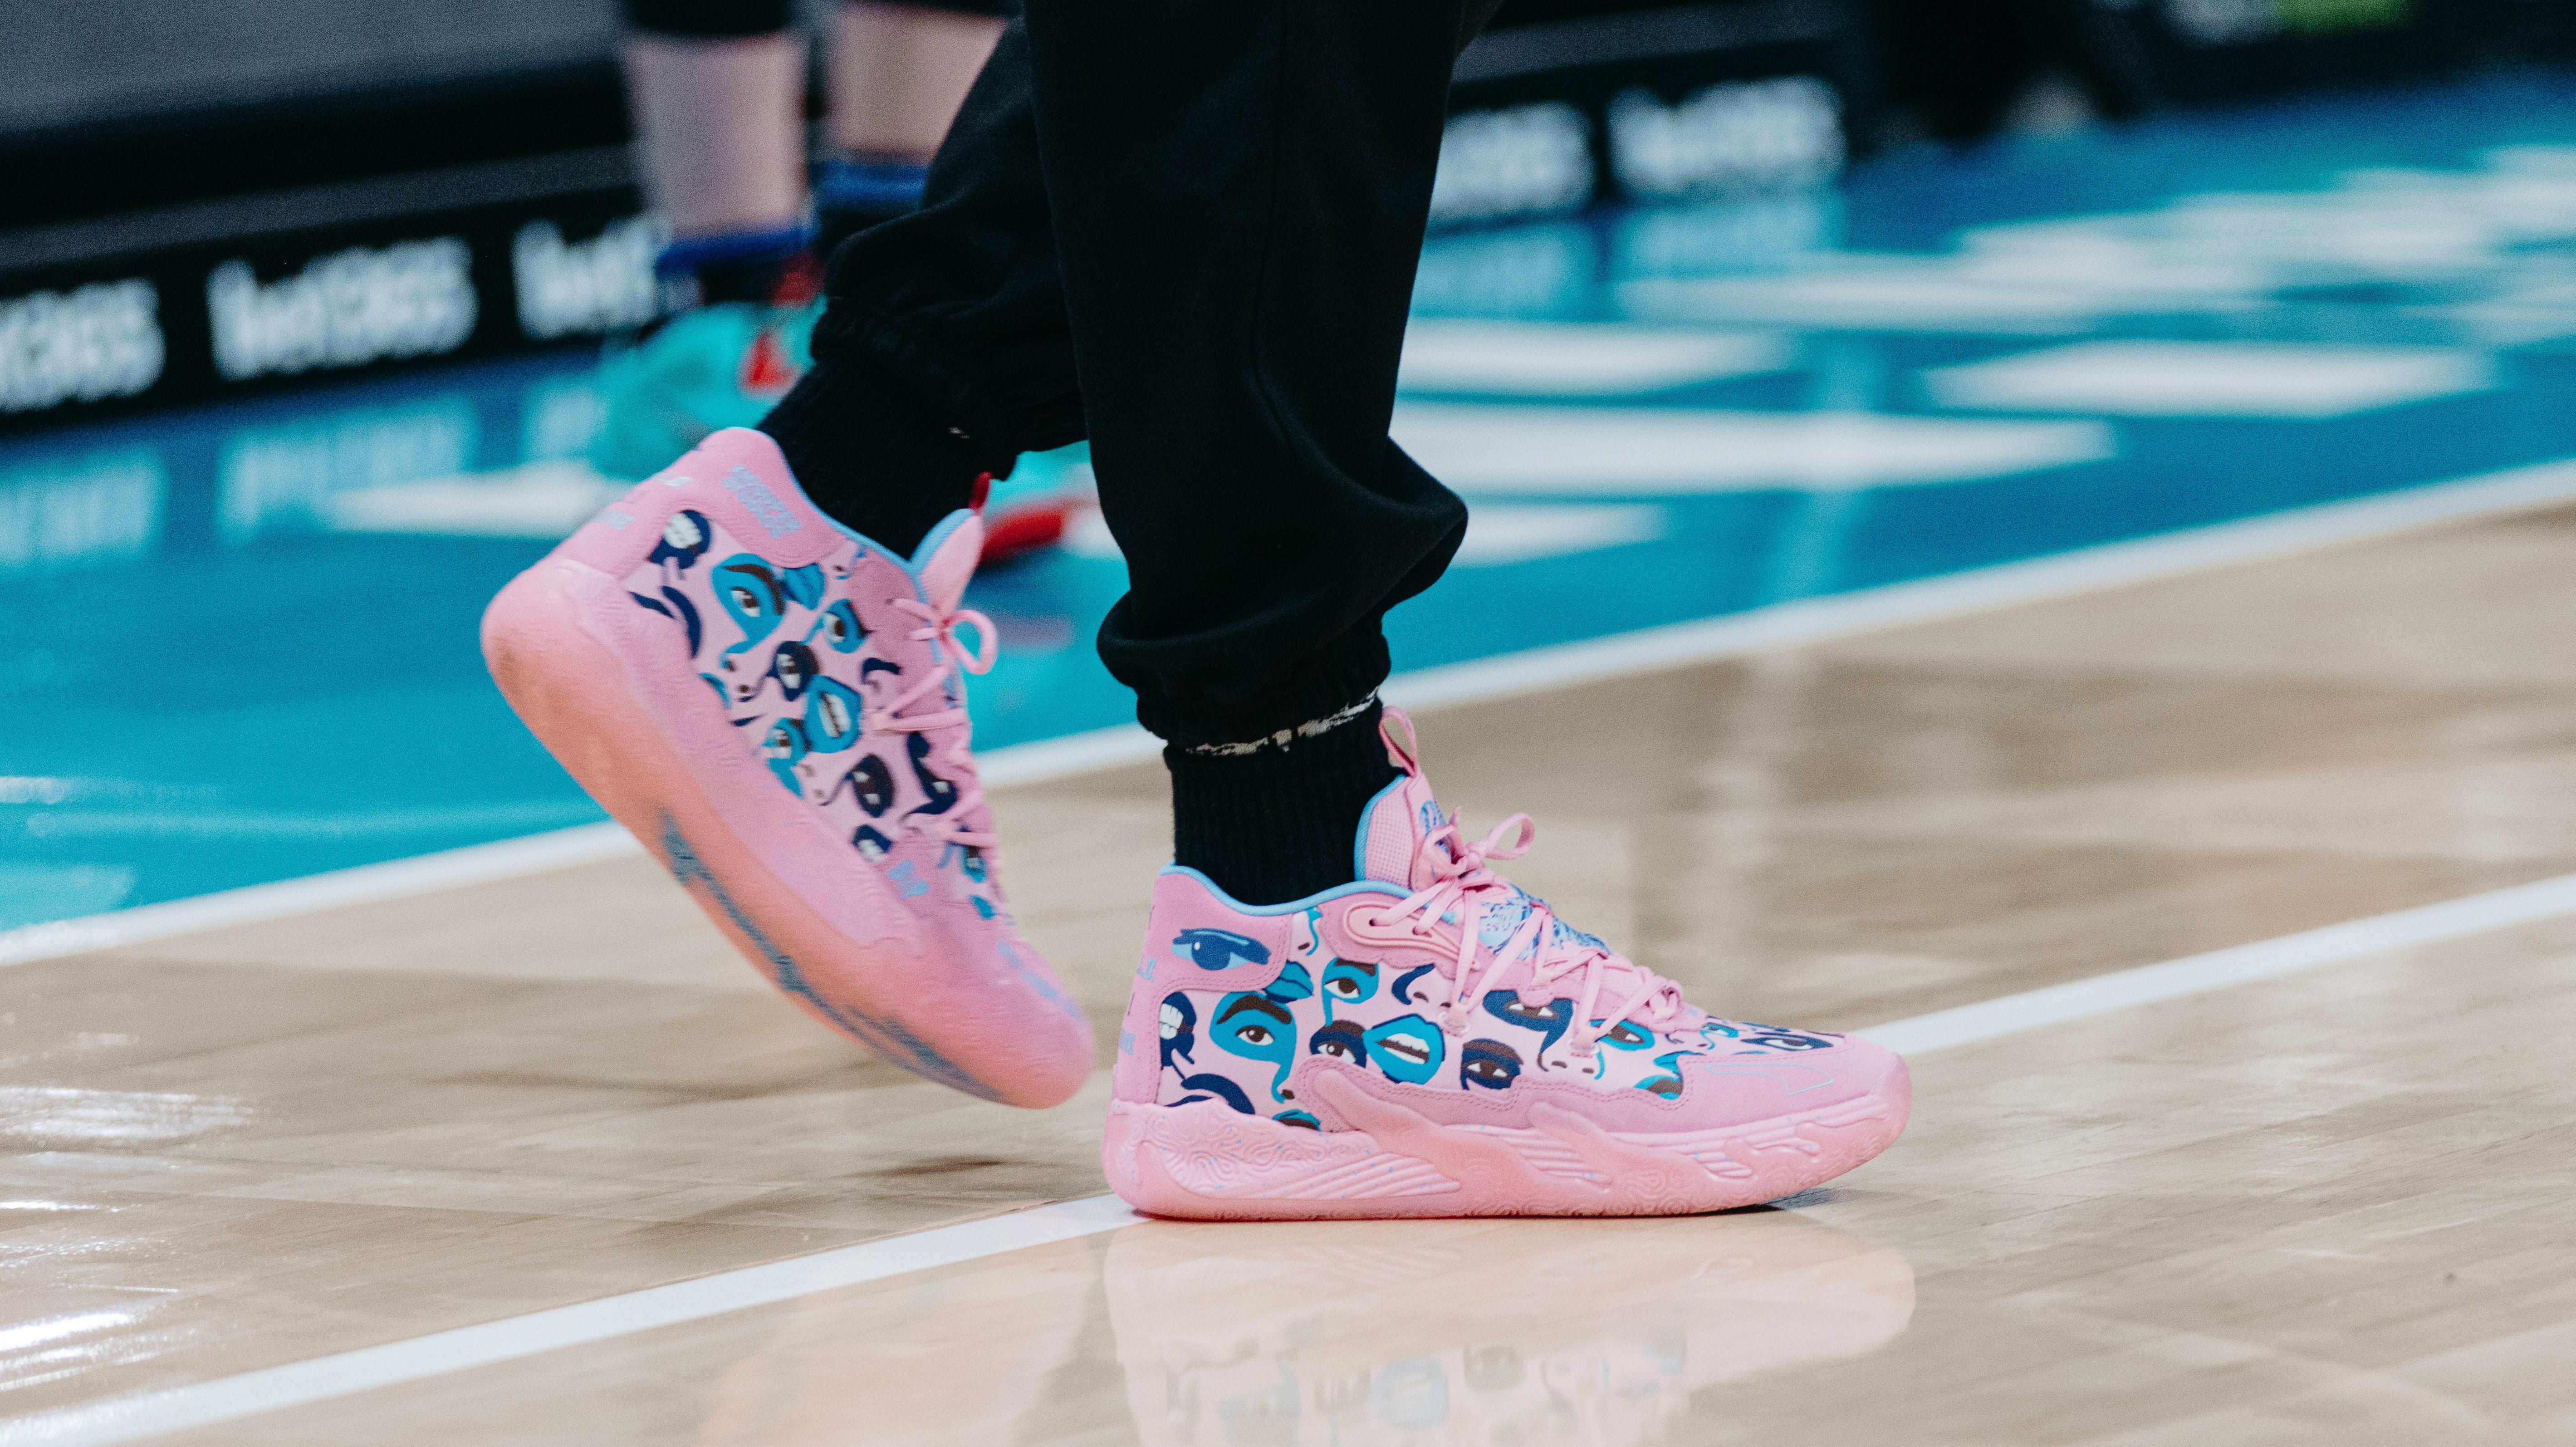 LaMelo Ball's pink and blue PUMA sneakers.